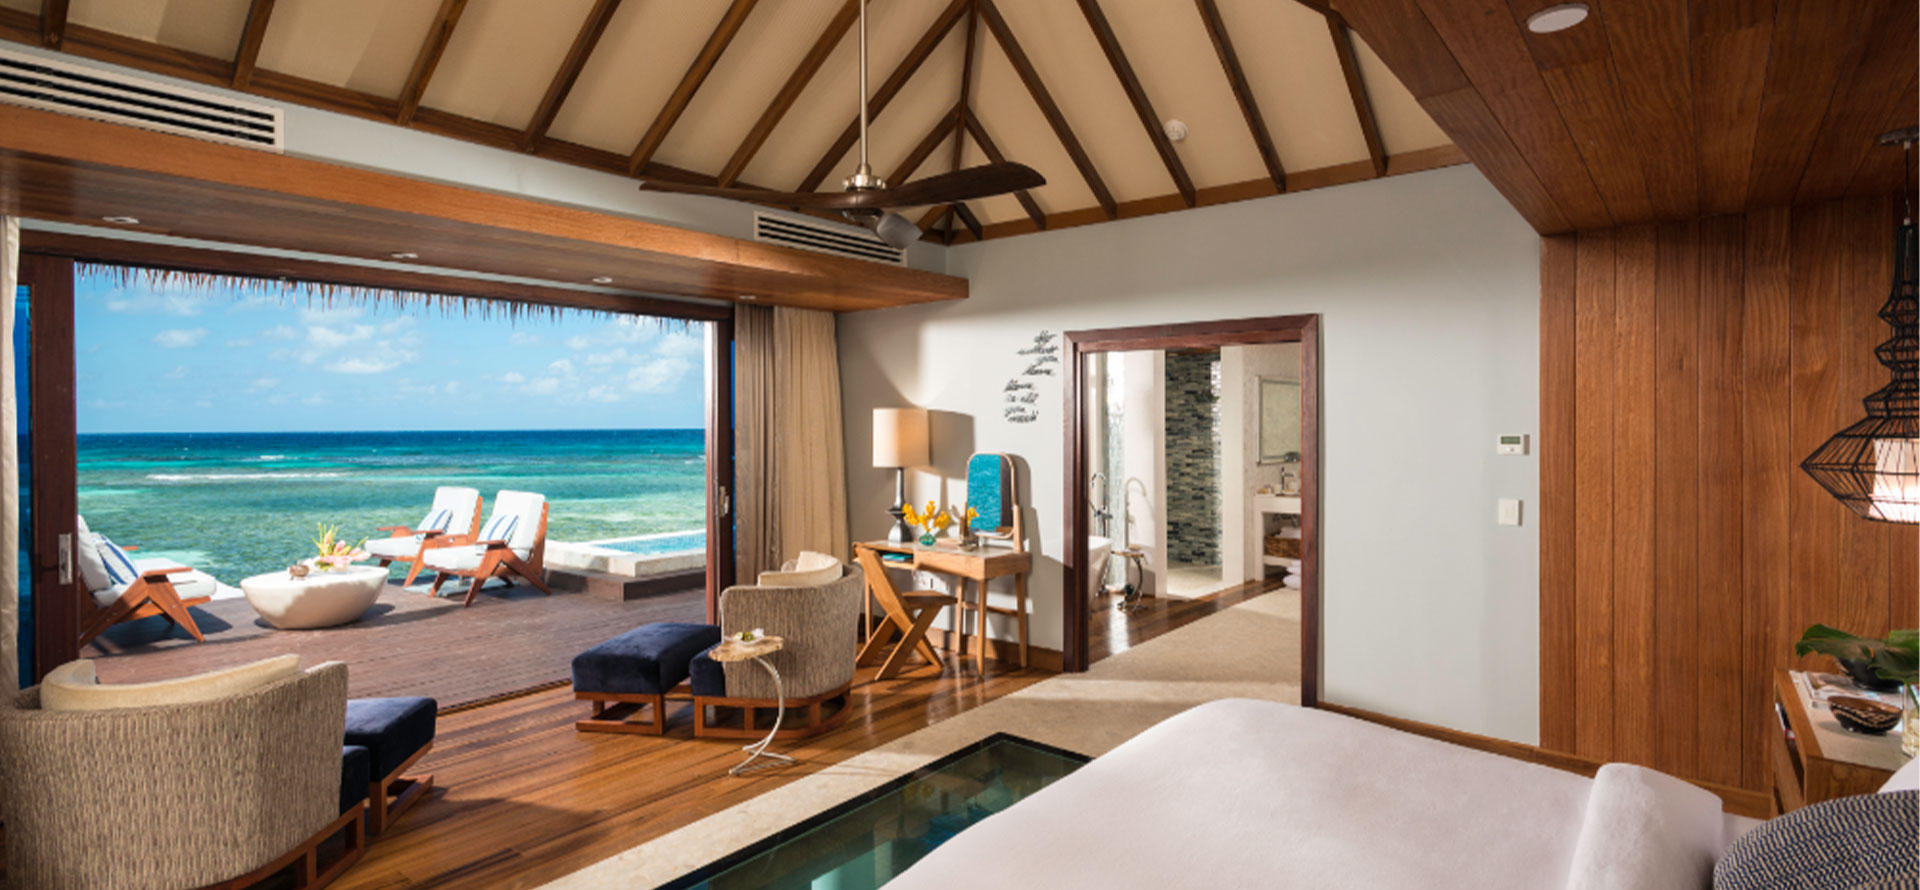 water bungalow Mexico inside view.